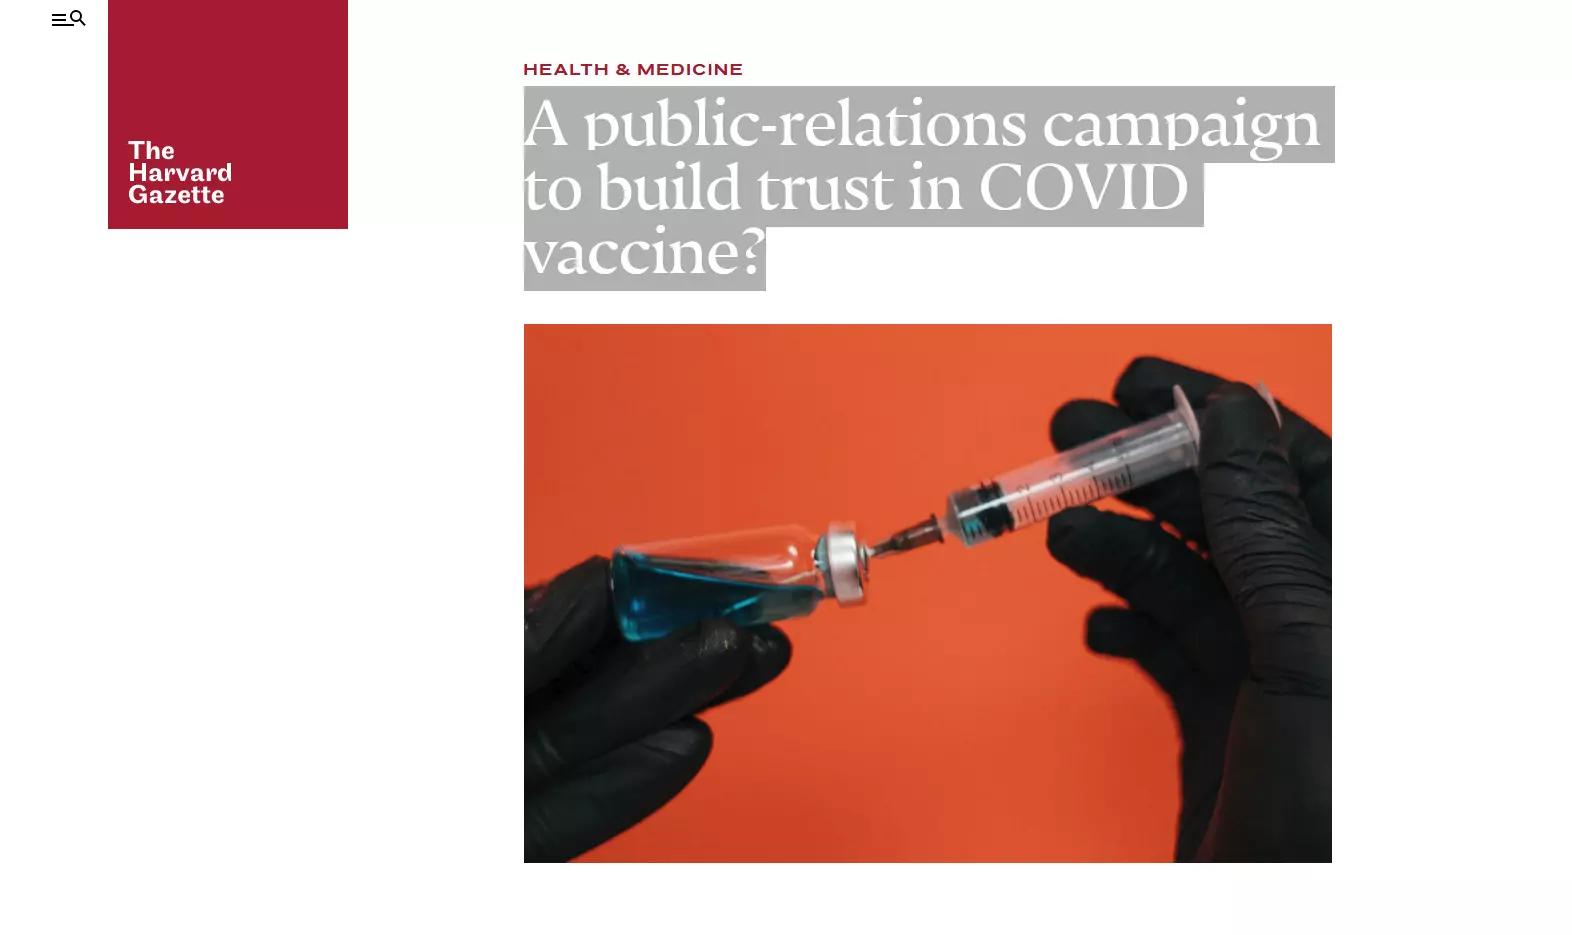 A public-relations campaign to build trust in the COVID vaccine?